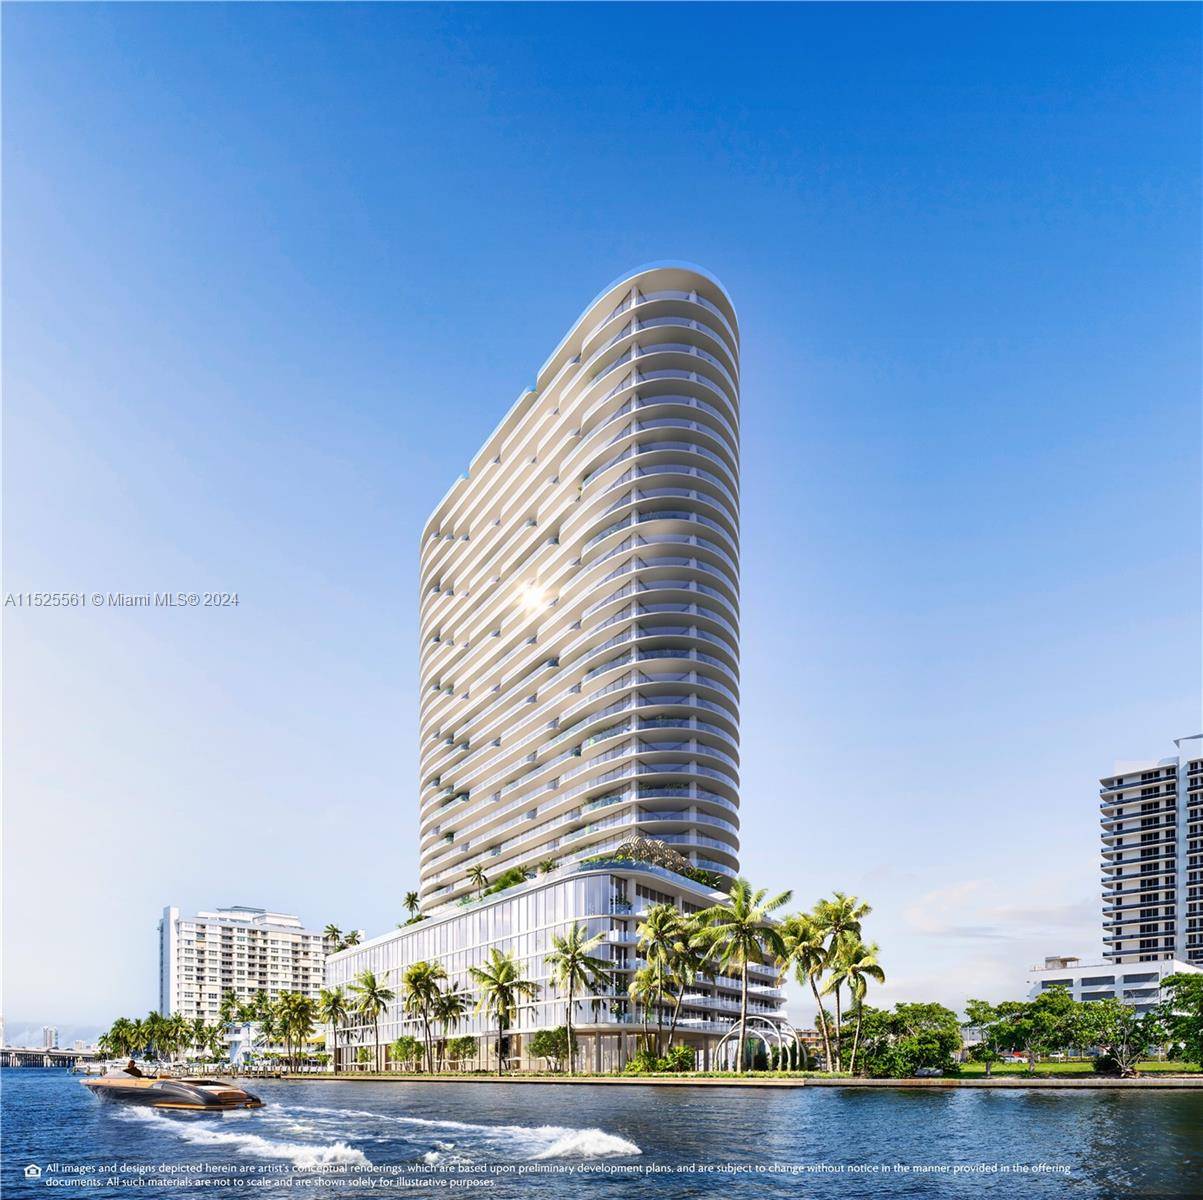 Introducing Continuum Club Residences, a prestigious enclave of 198 meticulously crafted residences and penthouses, poised to rival the renowned Continuum South Beach.